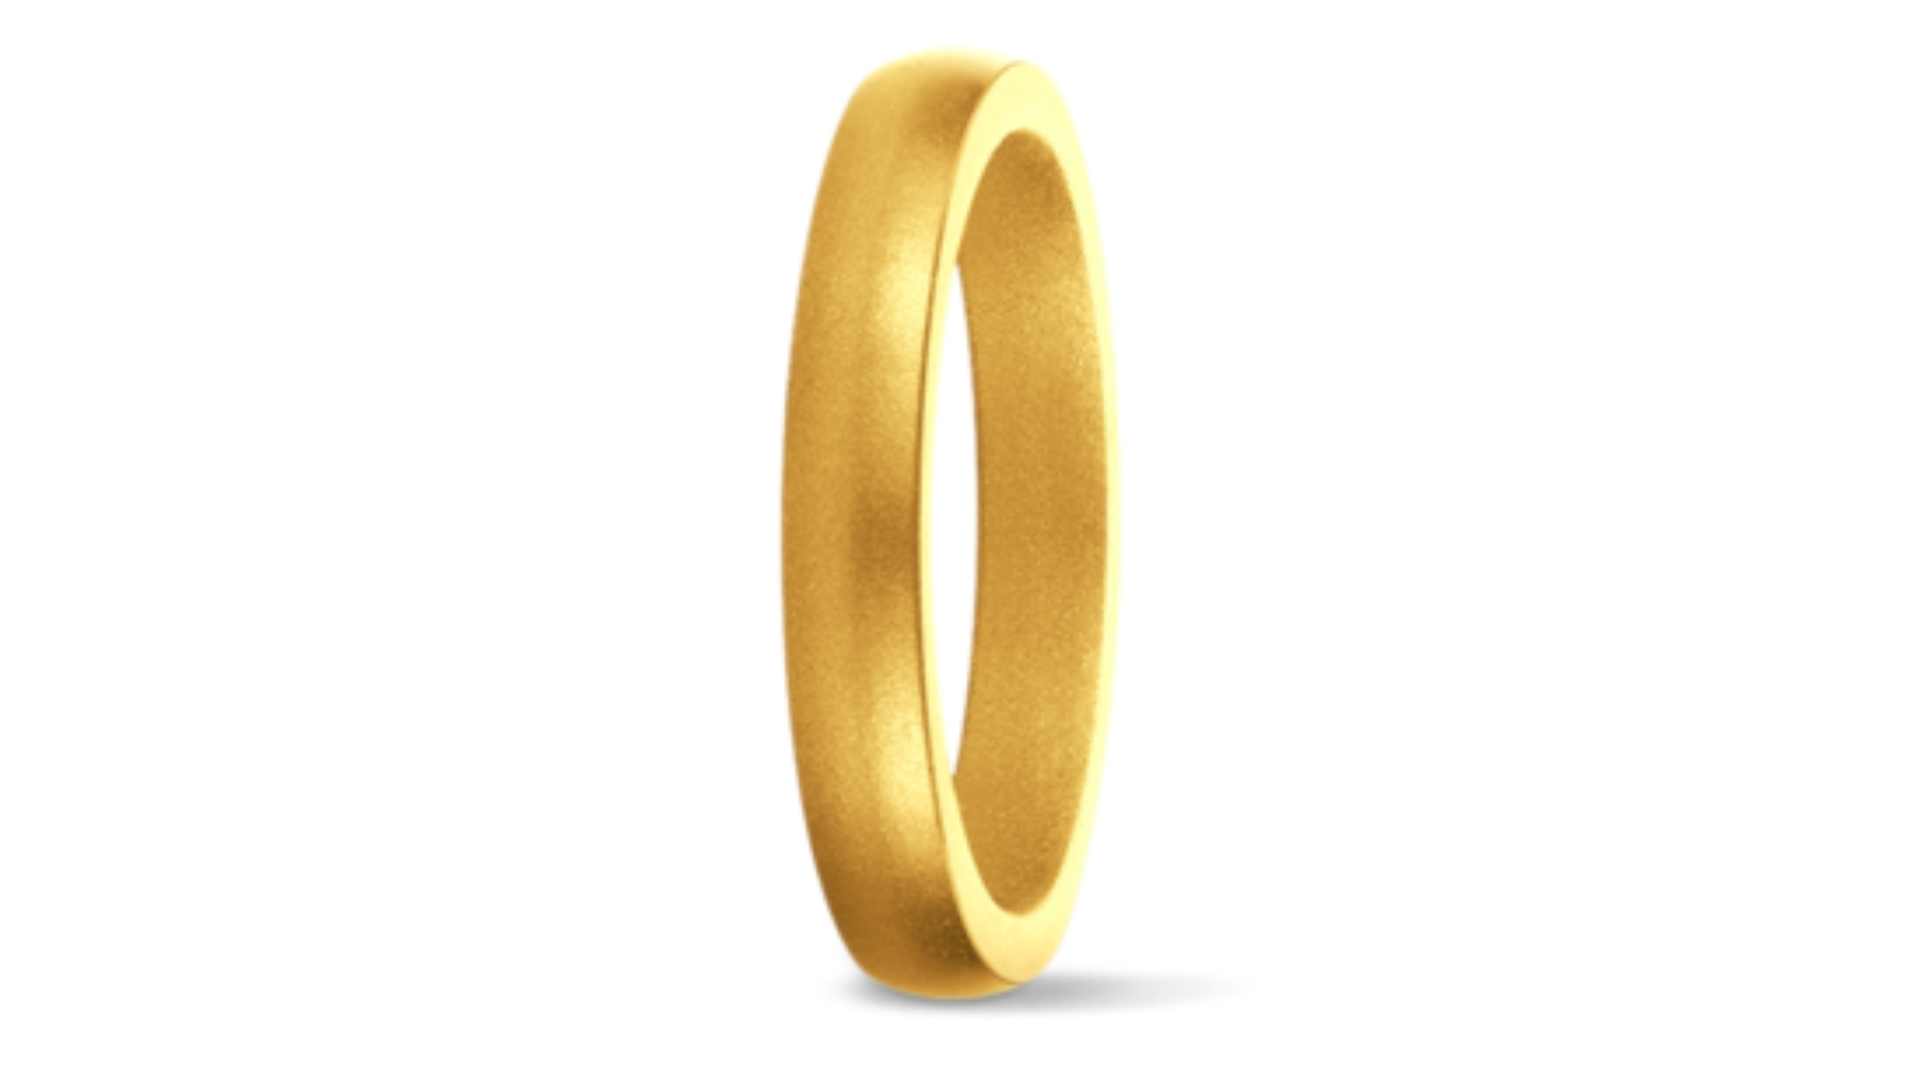 Saferingz Stackable gold silicone ring